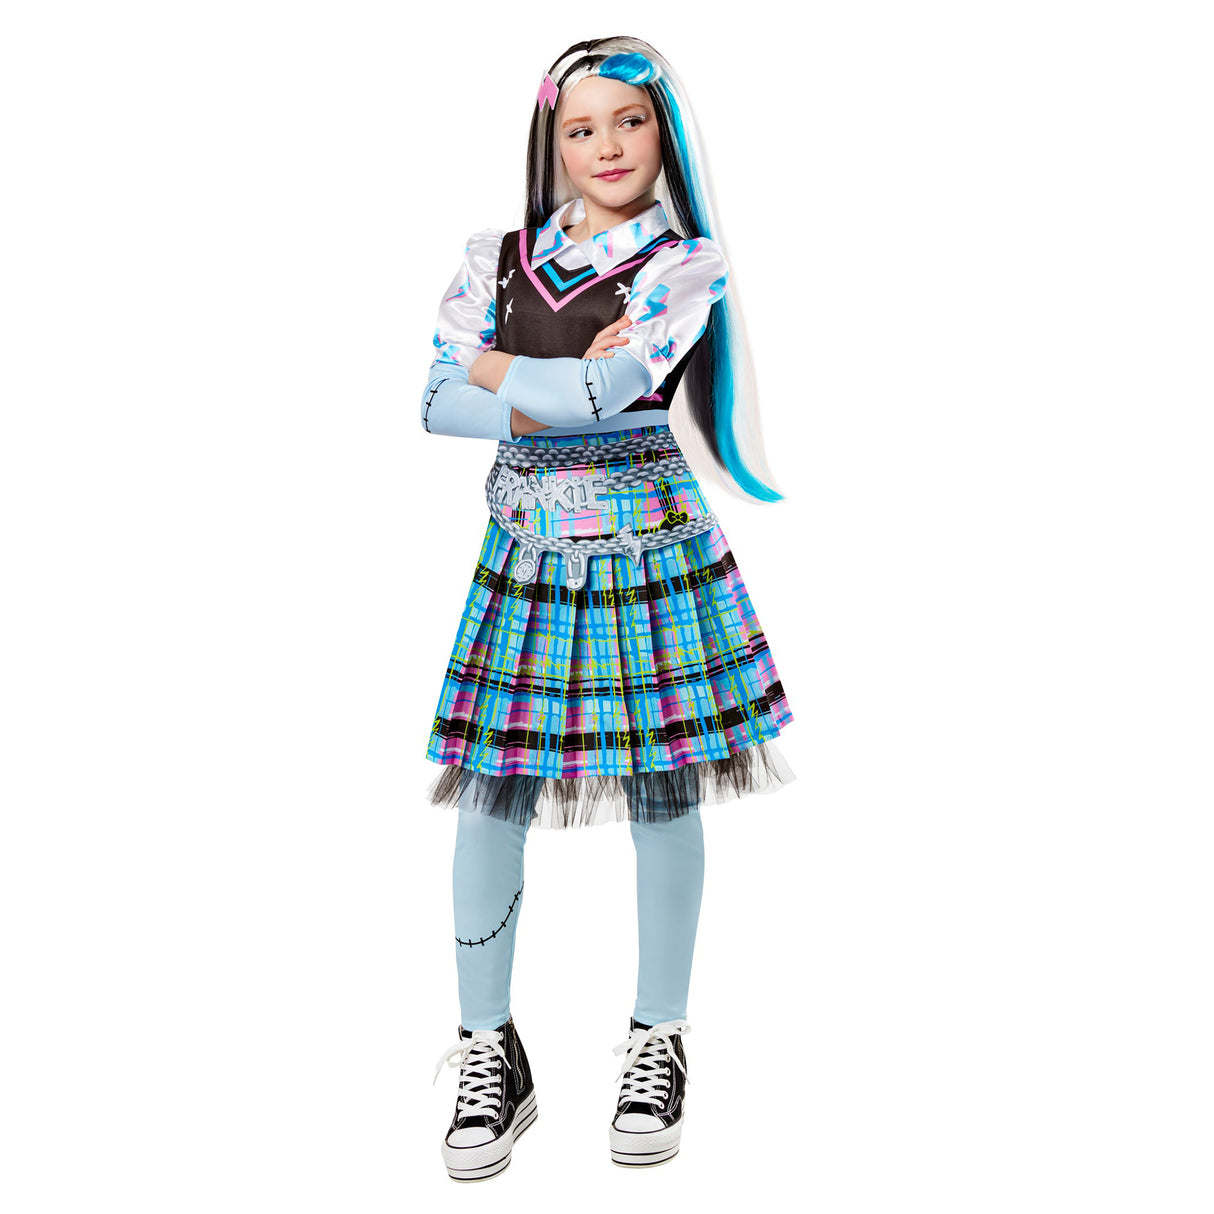 Rubies Frankie Stein Deluxe Monster High Costume (Small)